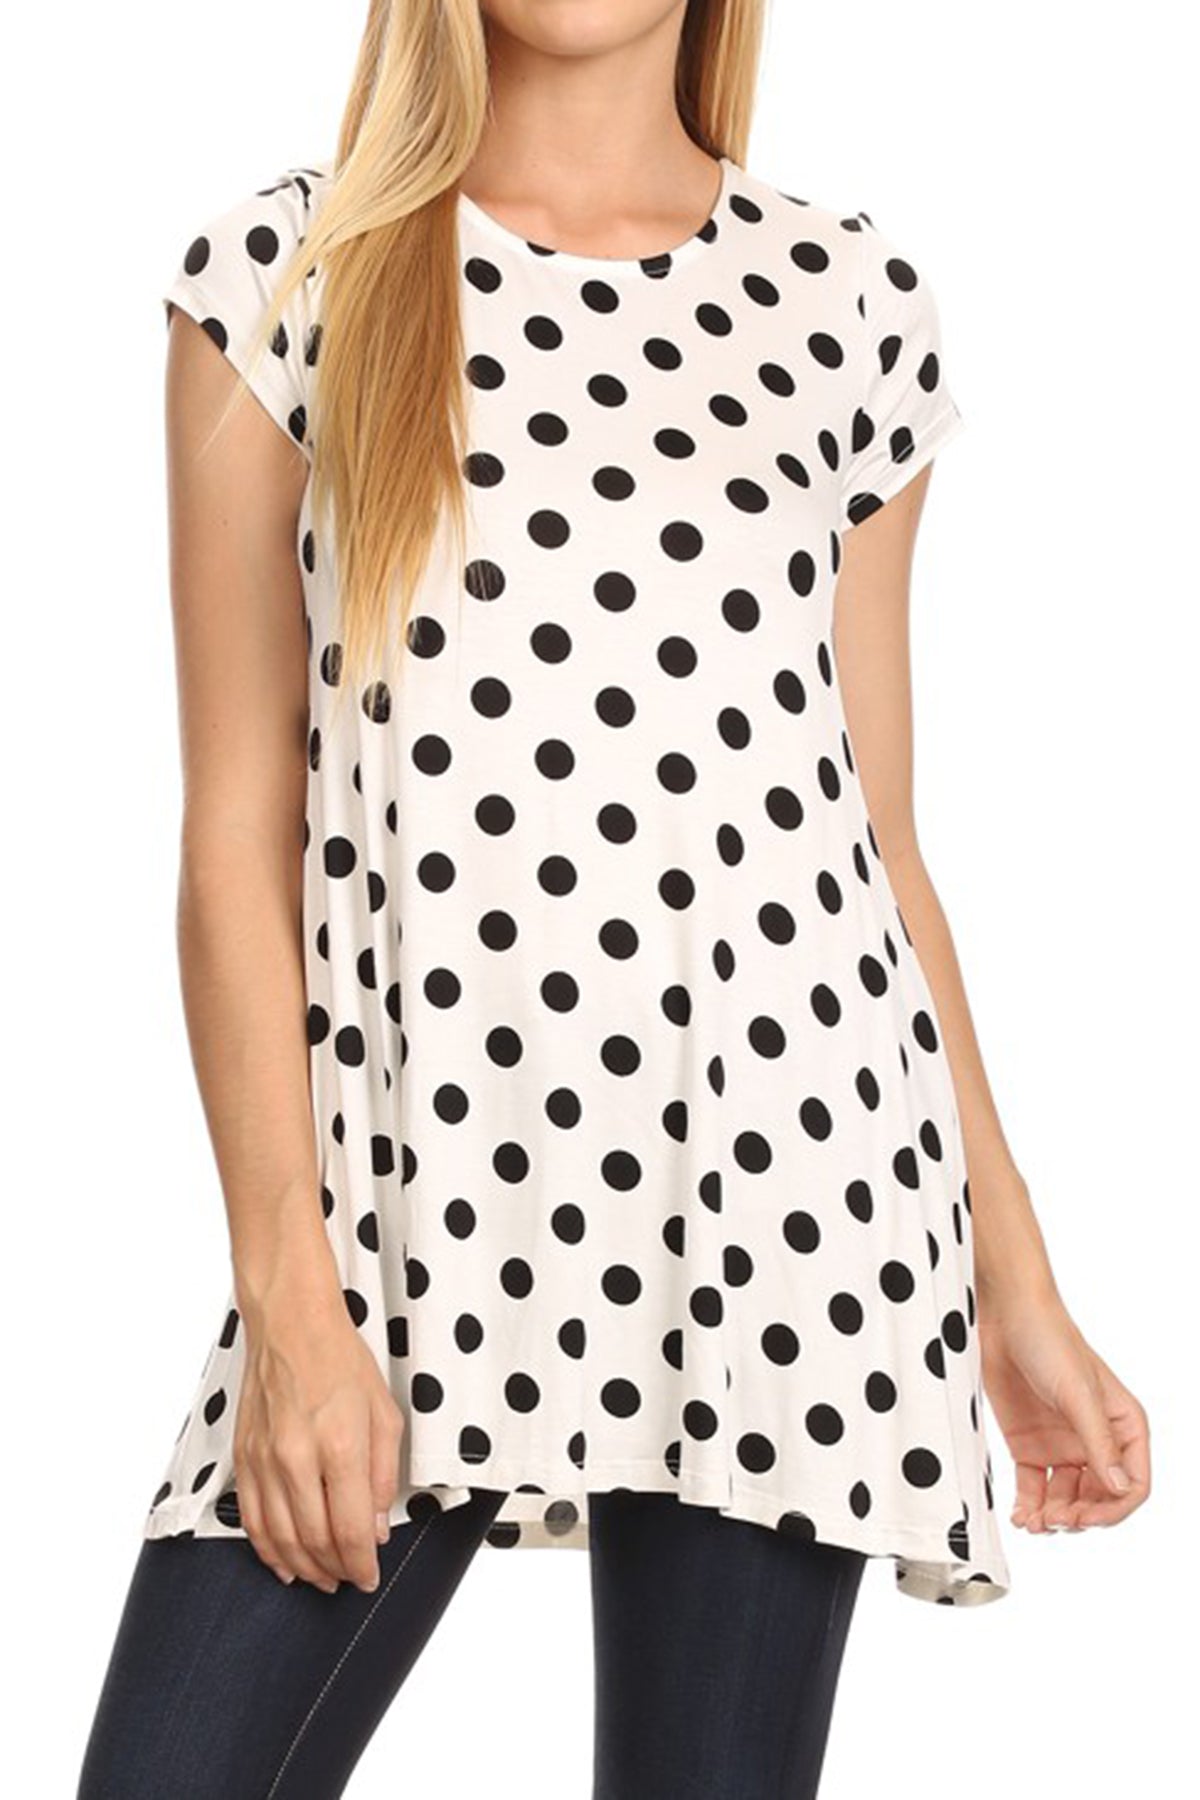 Women's Casual Polka Dot Short Sleeve Round Neck Tunic Tops with Side Pockets